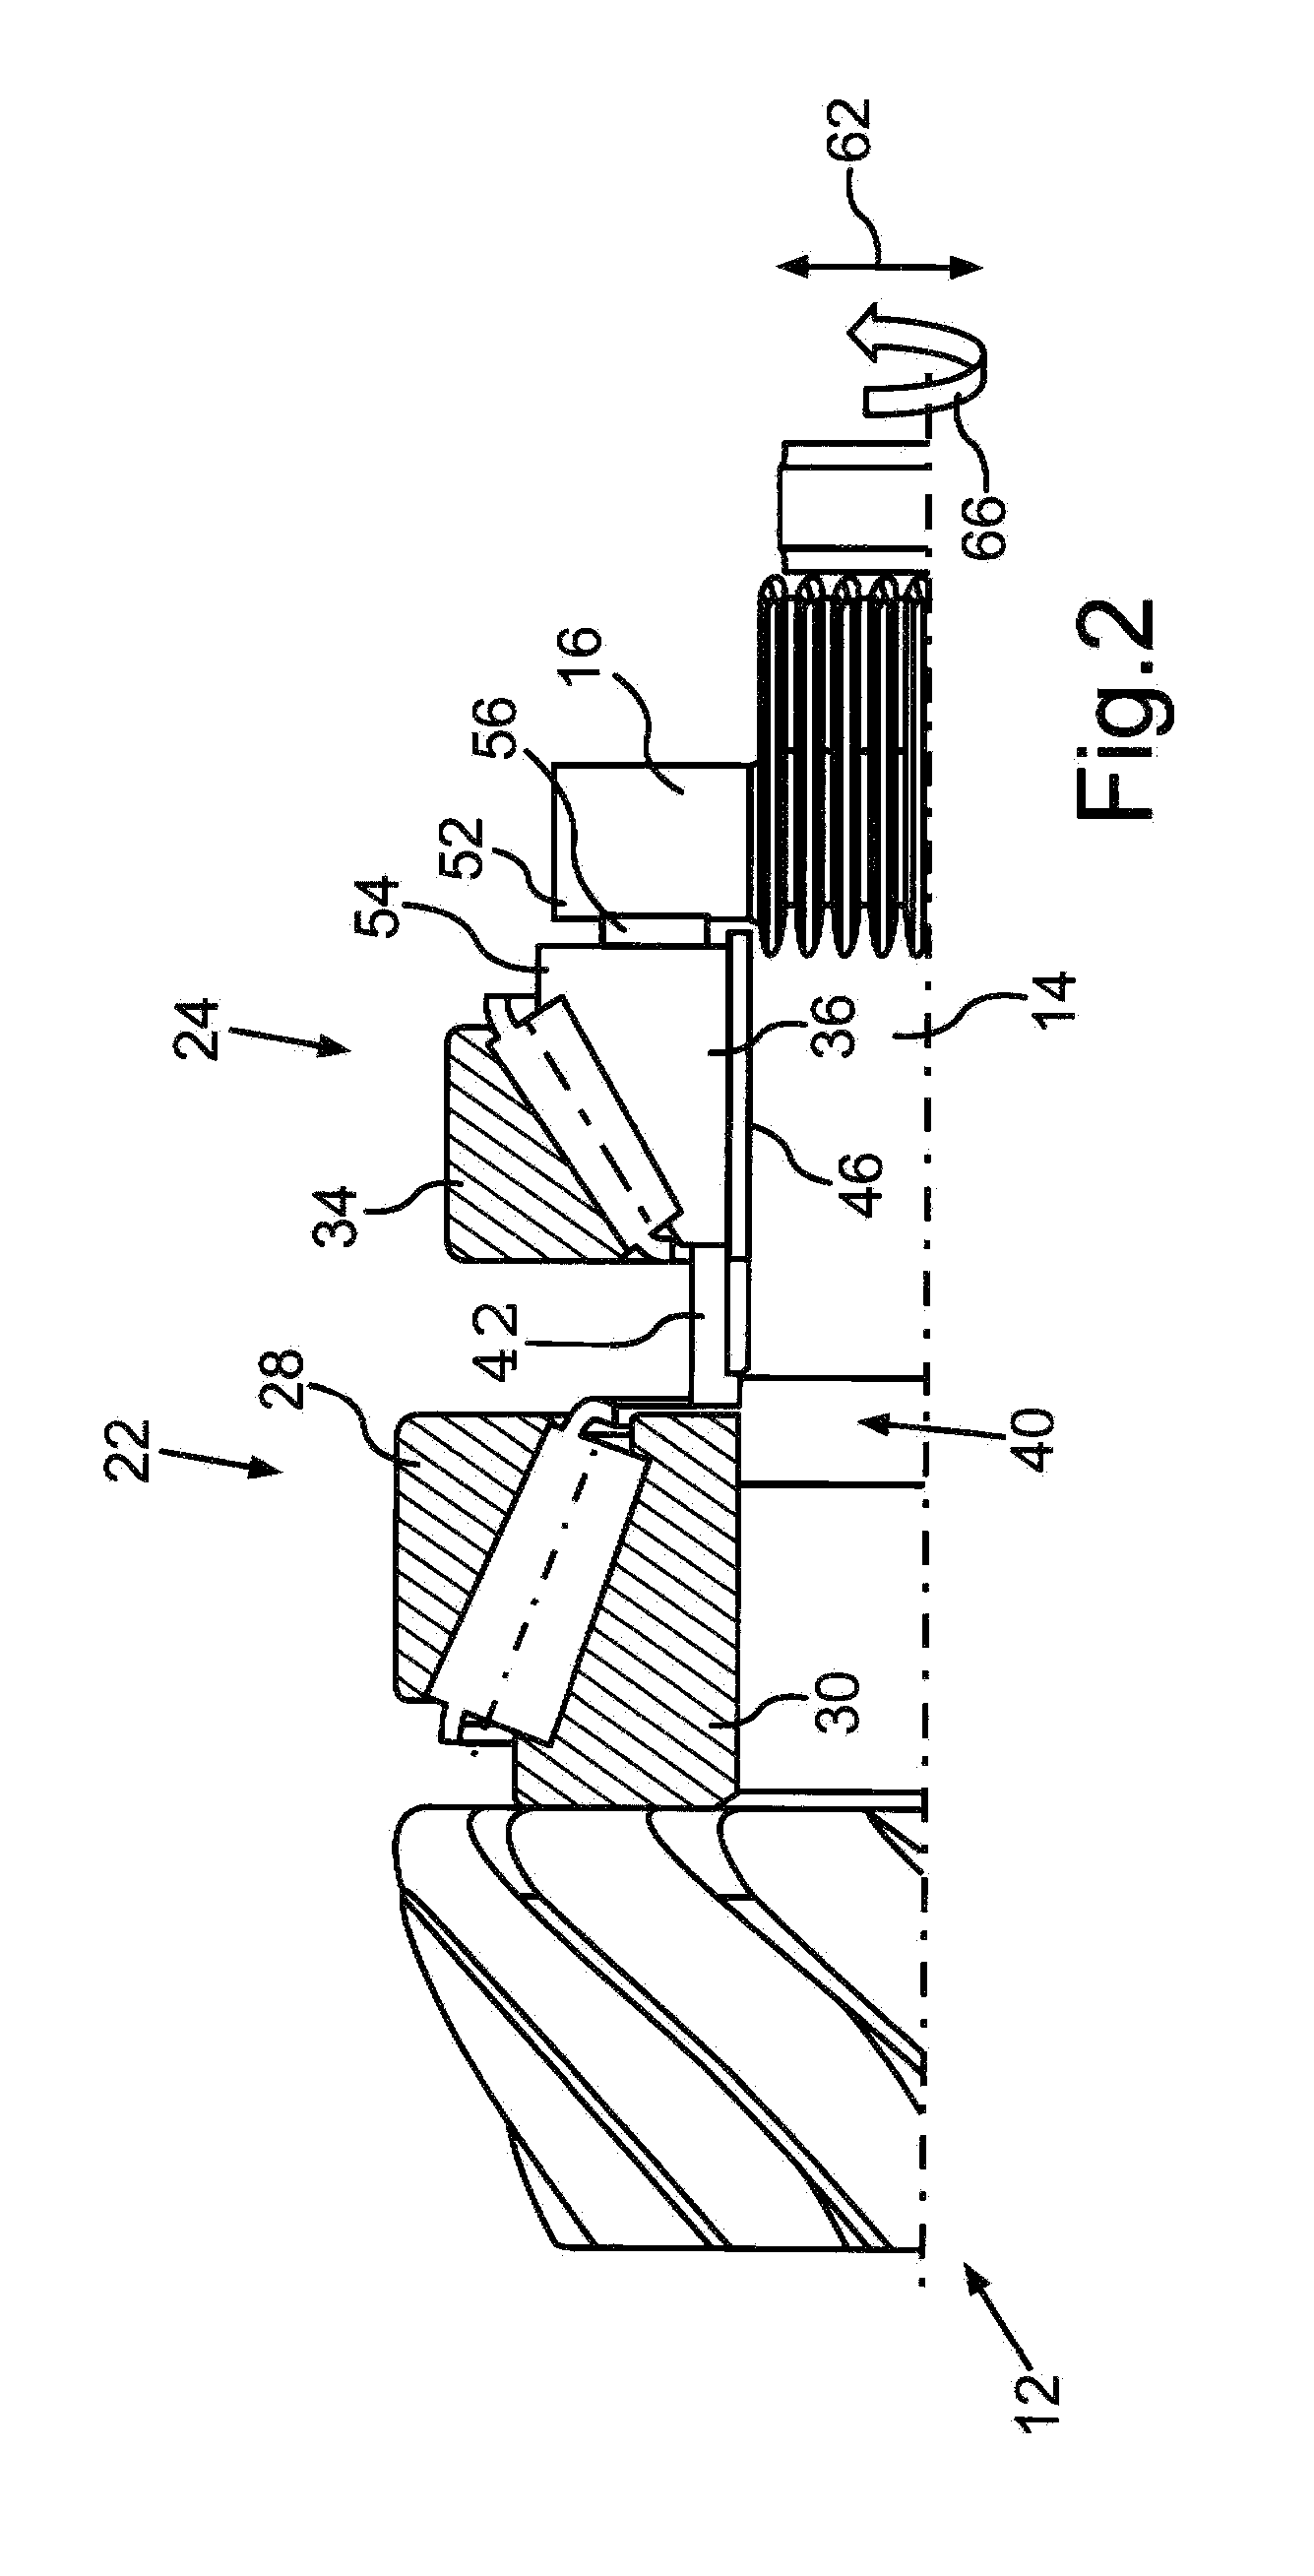 Bearing mounting arrangement for a drive train of a motor vehicle